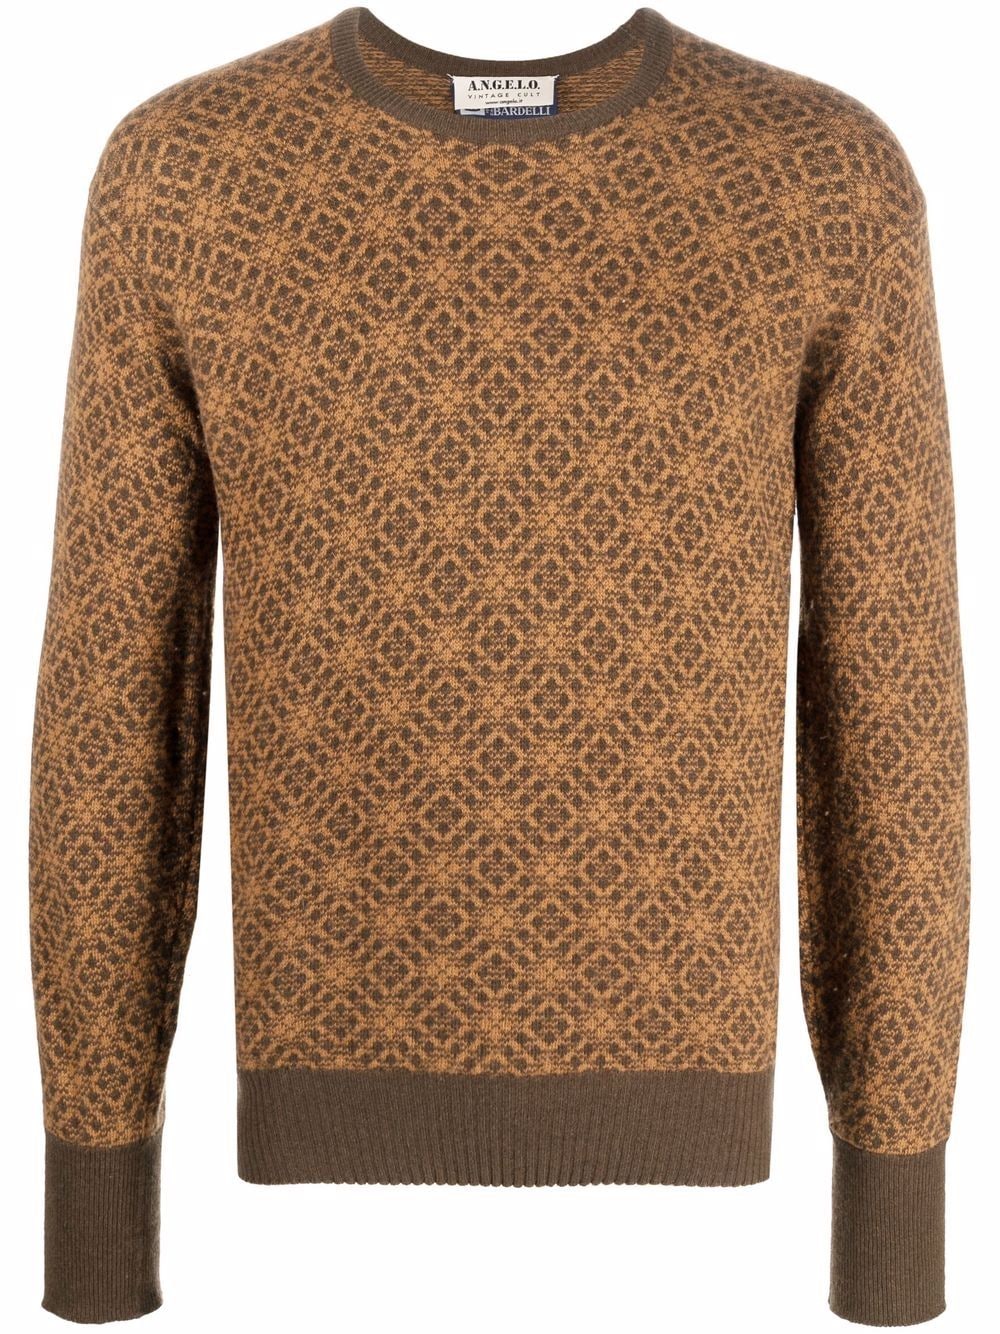 A.N.G.E.L.O. Vintage Cult 1970s Pullover mit geometrischem Muster - Braun von A.N.G.E.L.O. Vintage Cult